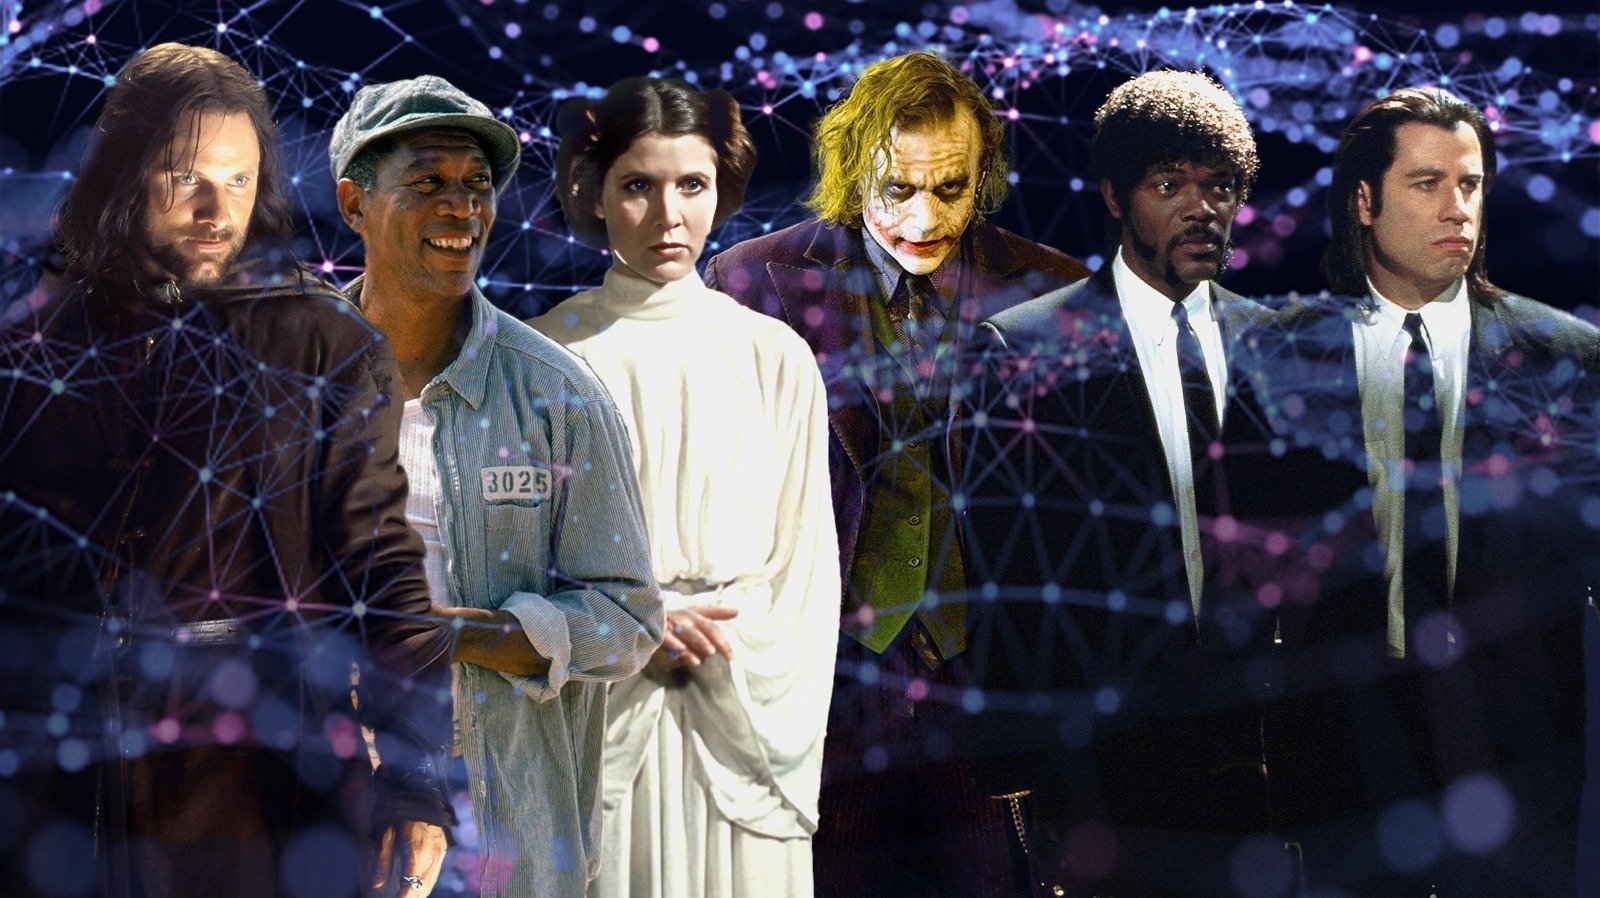 The 10 Best Movies of All Time, According to Artificial Intelligence